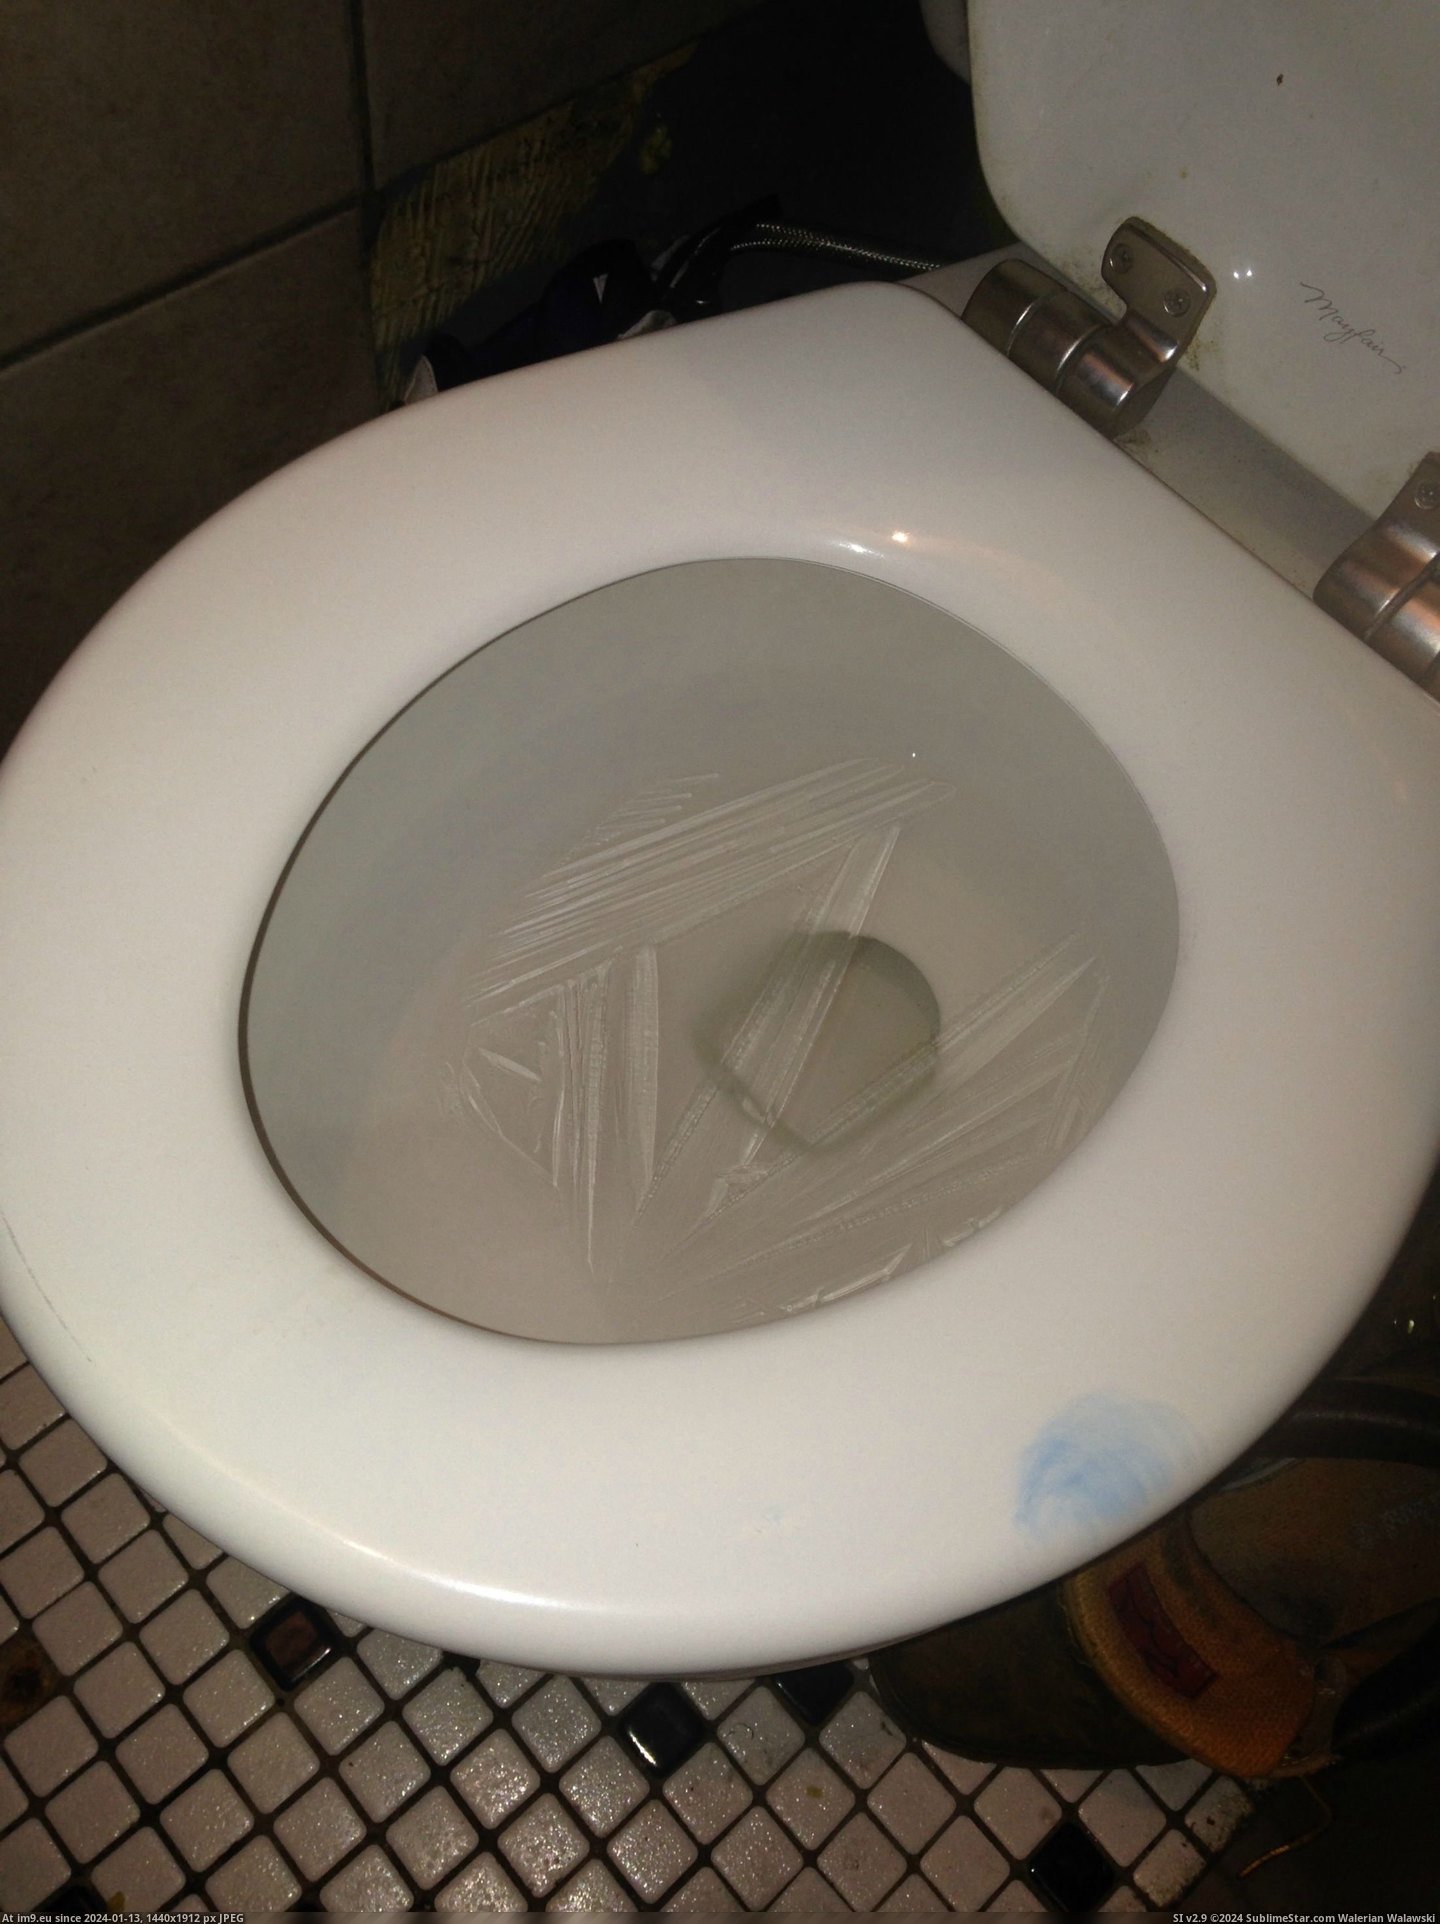 #Work #Water #Toilet #Froze #Bathroom #Cold [Mildlyinteresting] It's so cold in the bathroom at work that the toilet water froze today. Pic. (Bild von album My r/MILDLYINTERESTING favs))